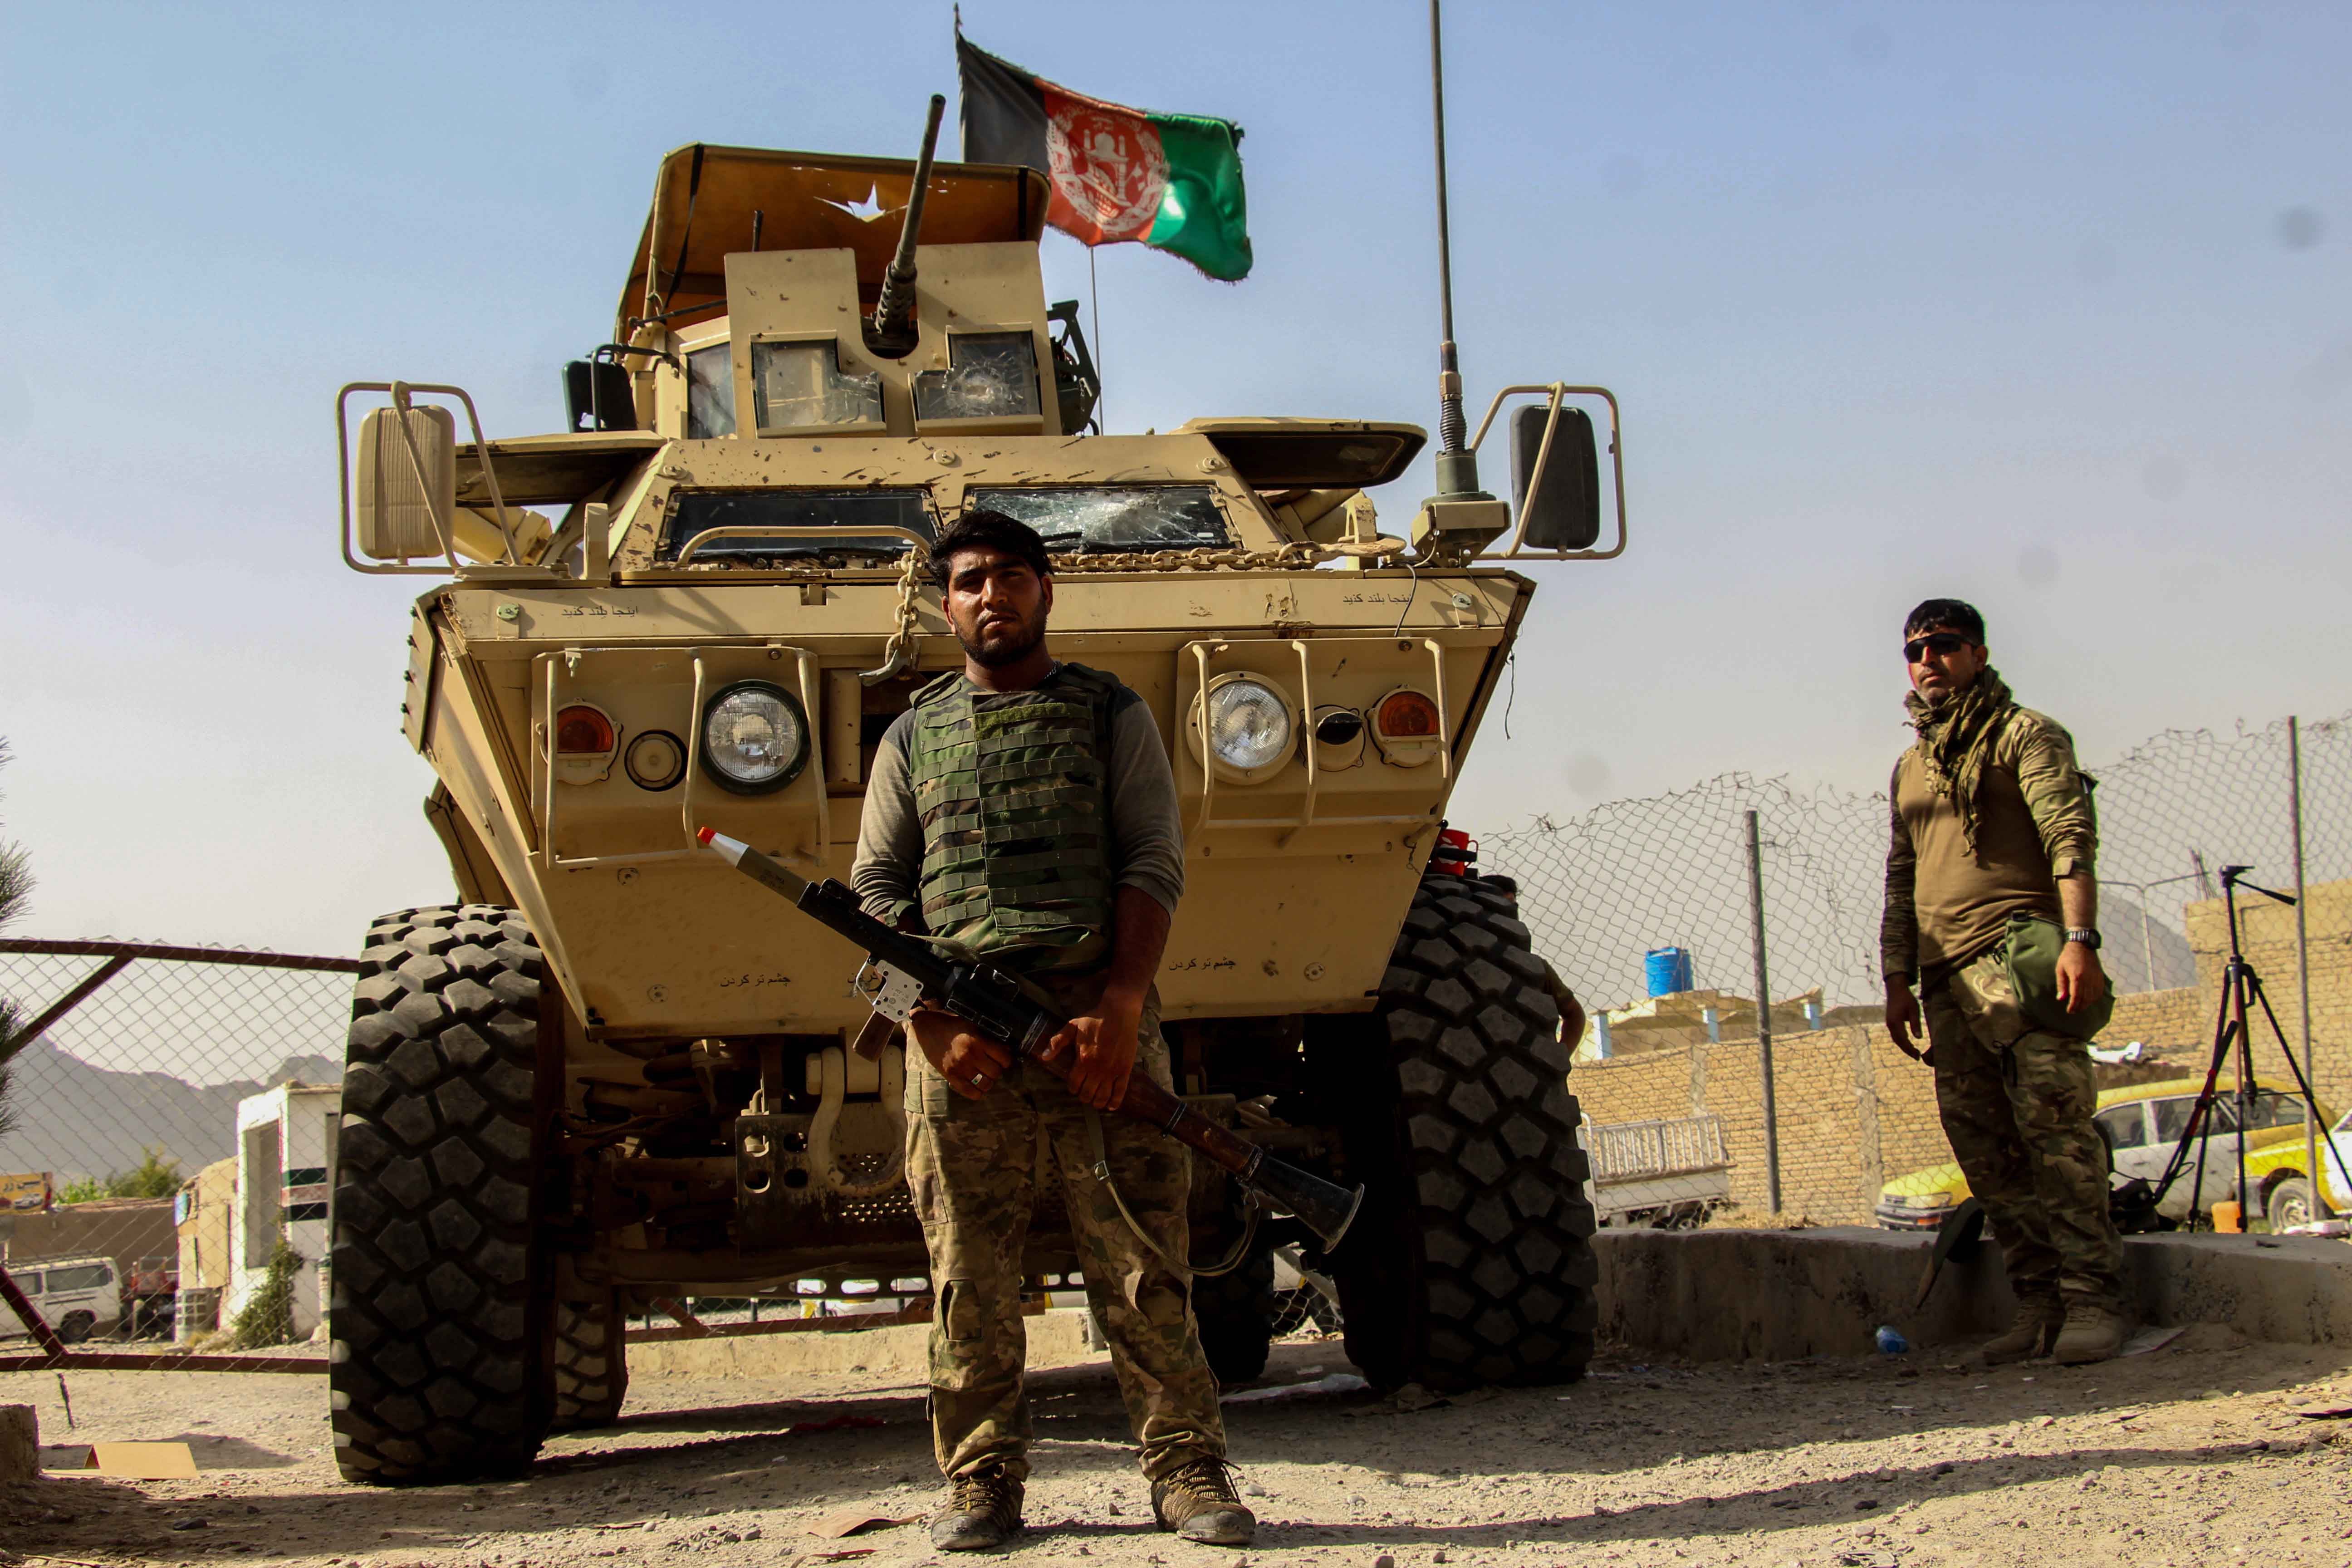 Afghan security forces near the Spin Boldak crossing in Kandahar province on the border with Pakistan. The Talban captured a district in the region and raised its flag at the checkpoint last week